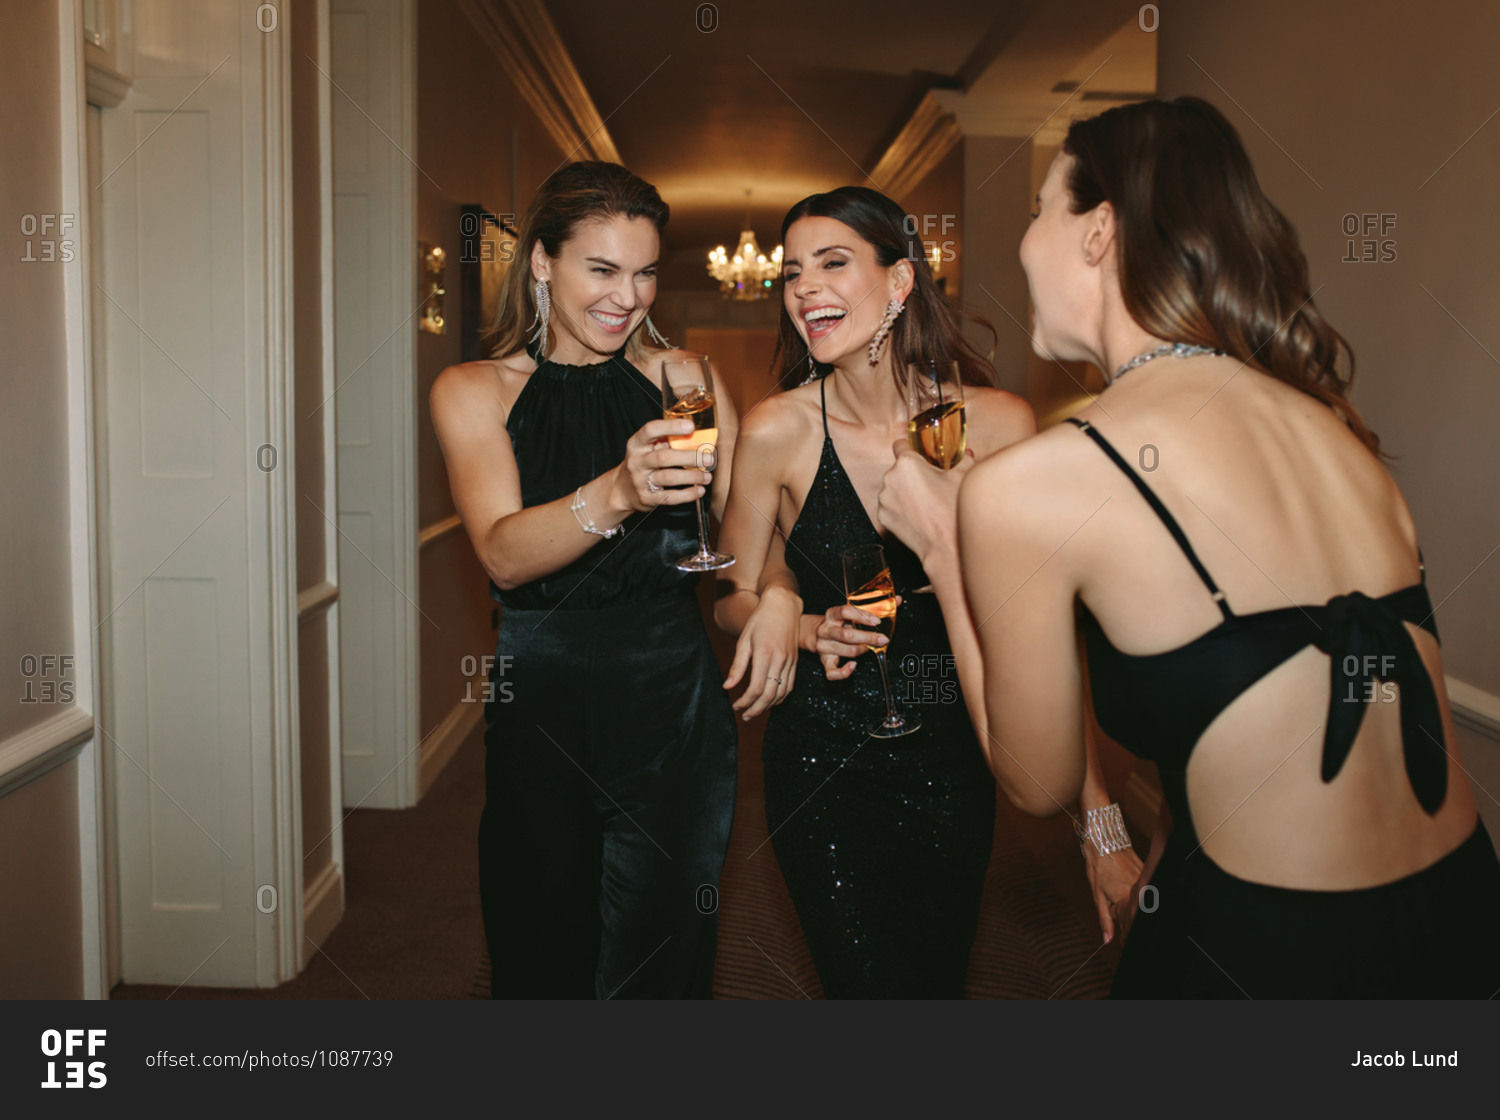 Group of women having a great time gala night. Female socialites enjoying with drinks at a gala night party.